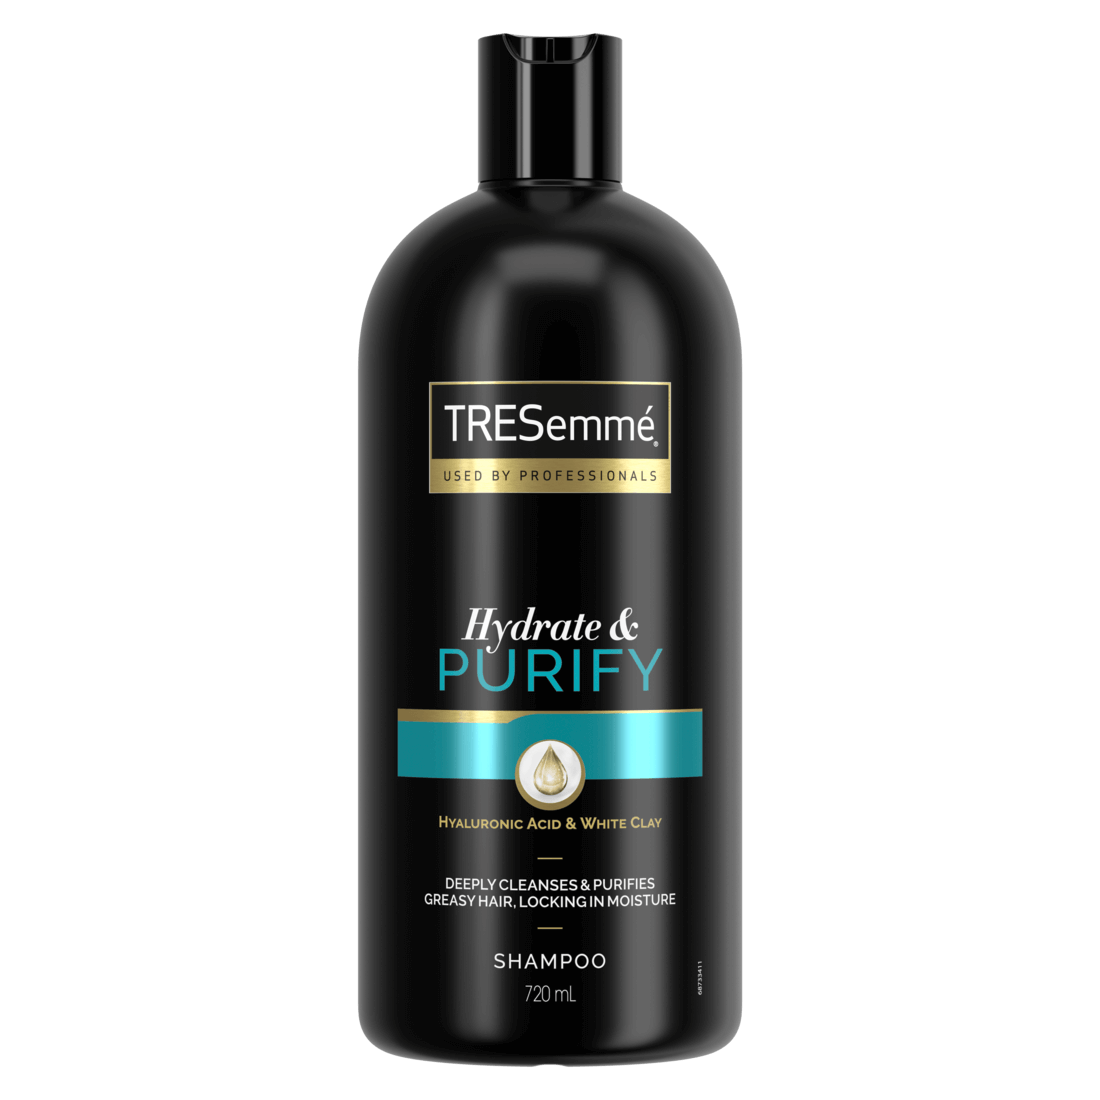 Hydrate & Purify Shampoo 720 ml front of pack